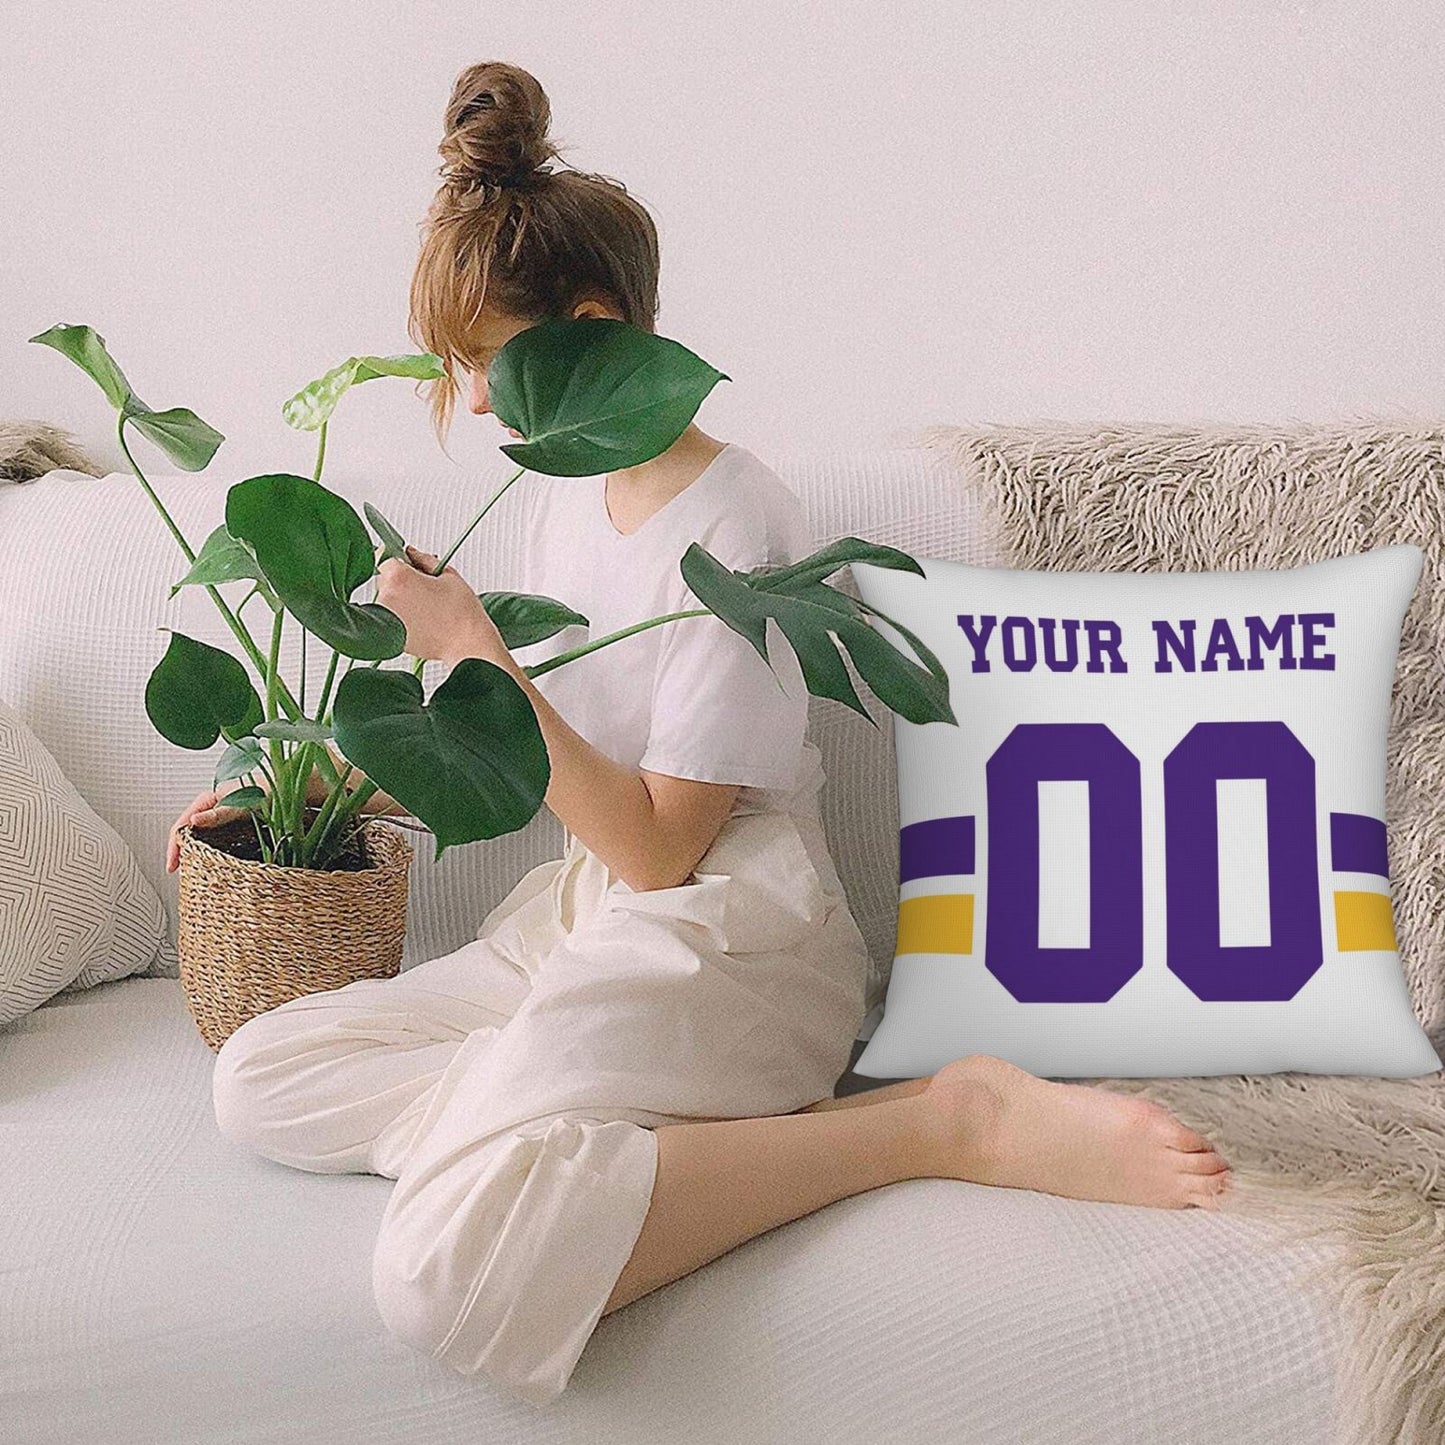 Customized Minnesota Vikings Football Team Decorative Throw Pillow Case Print Personalized Football Style Fans Letters & Number White Pillowcase Birthday Gift